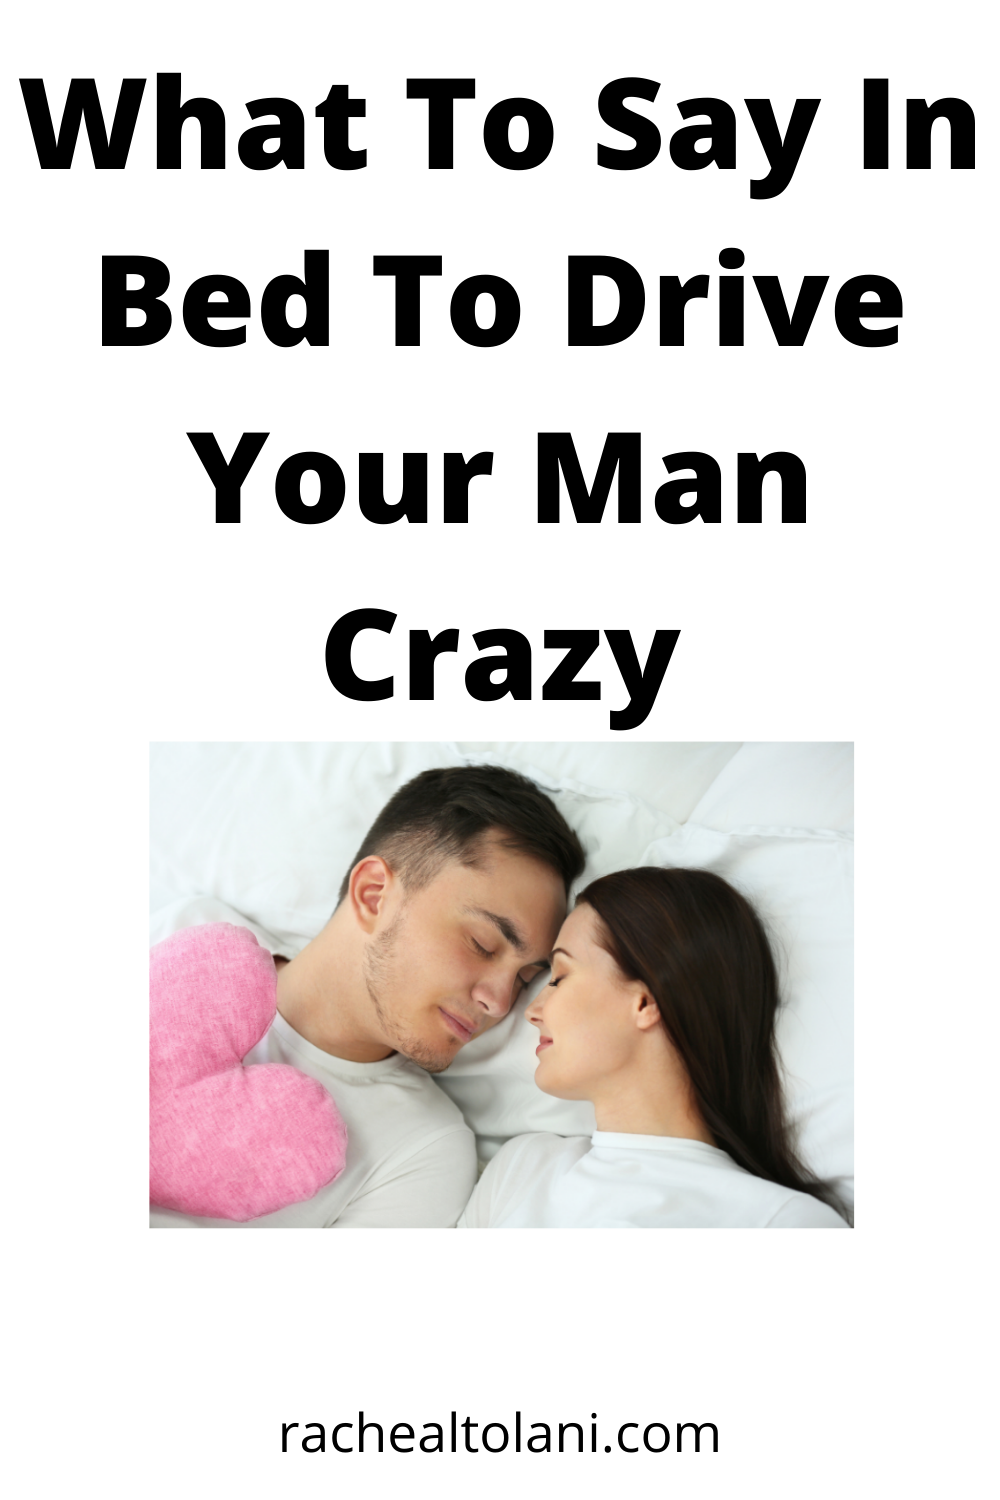 Sexy Things to say in bed to drive a man crazy